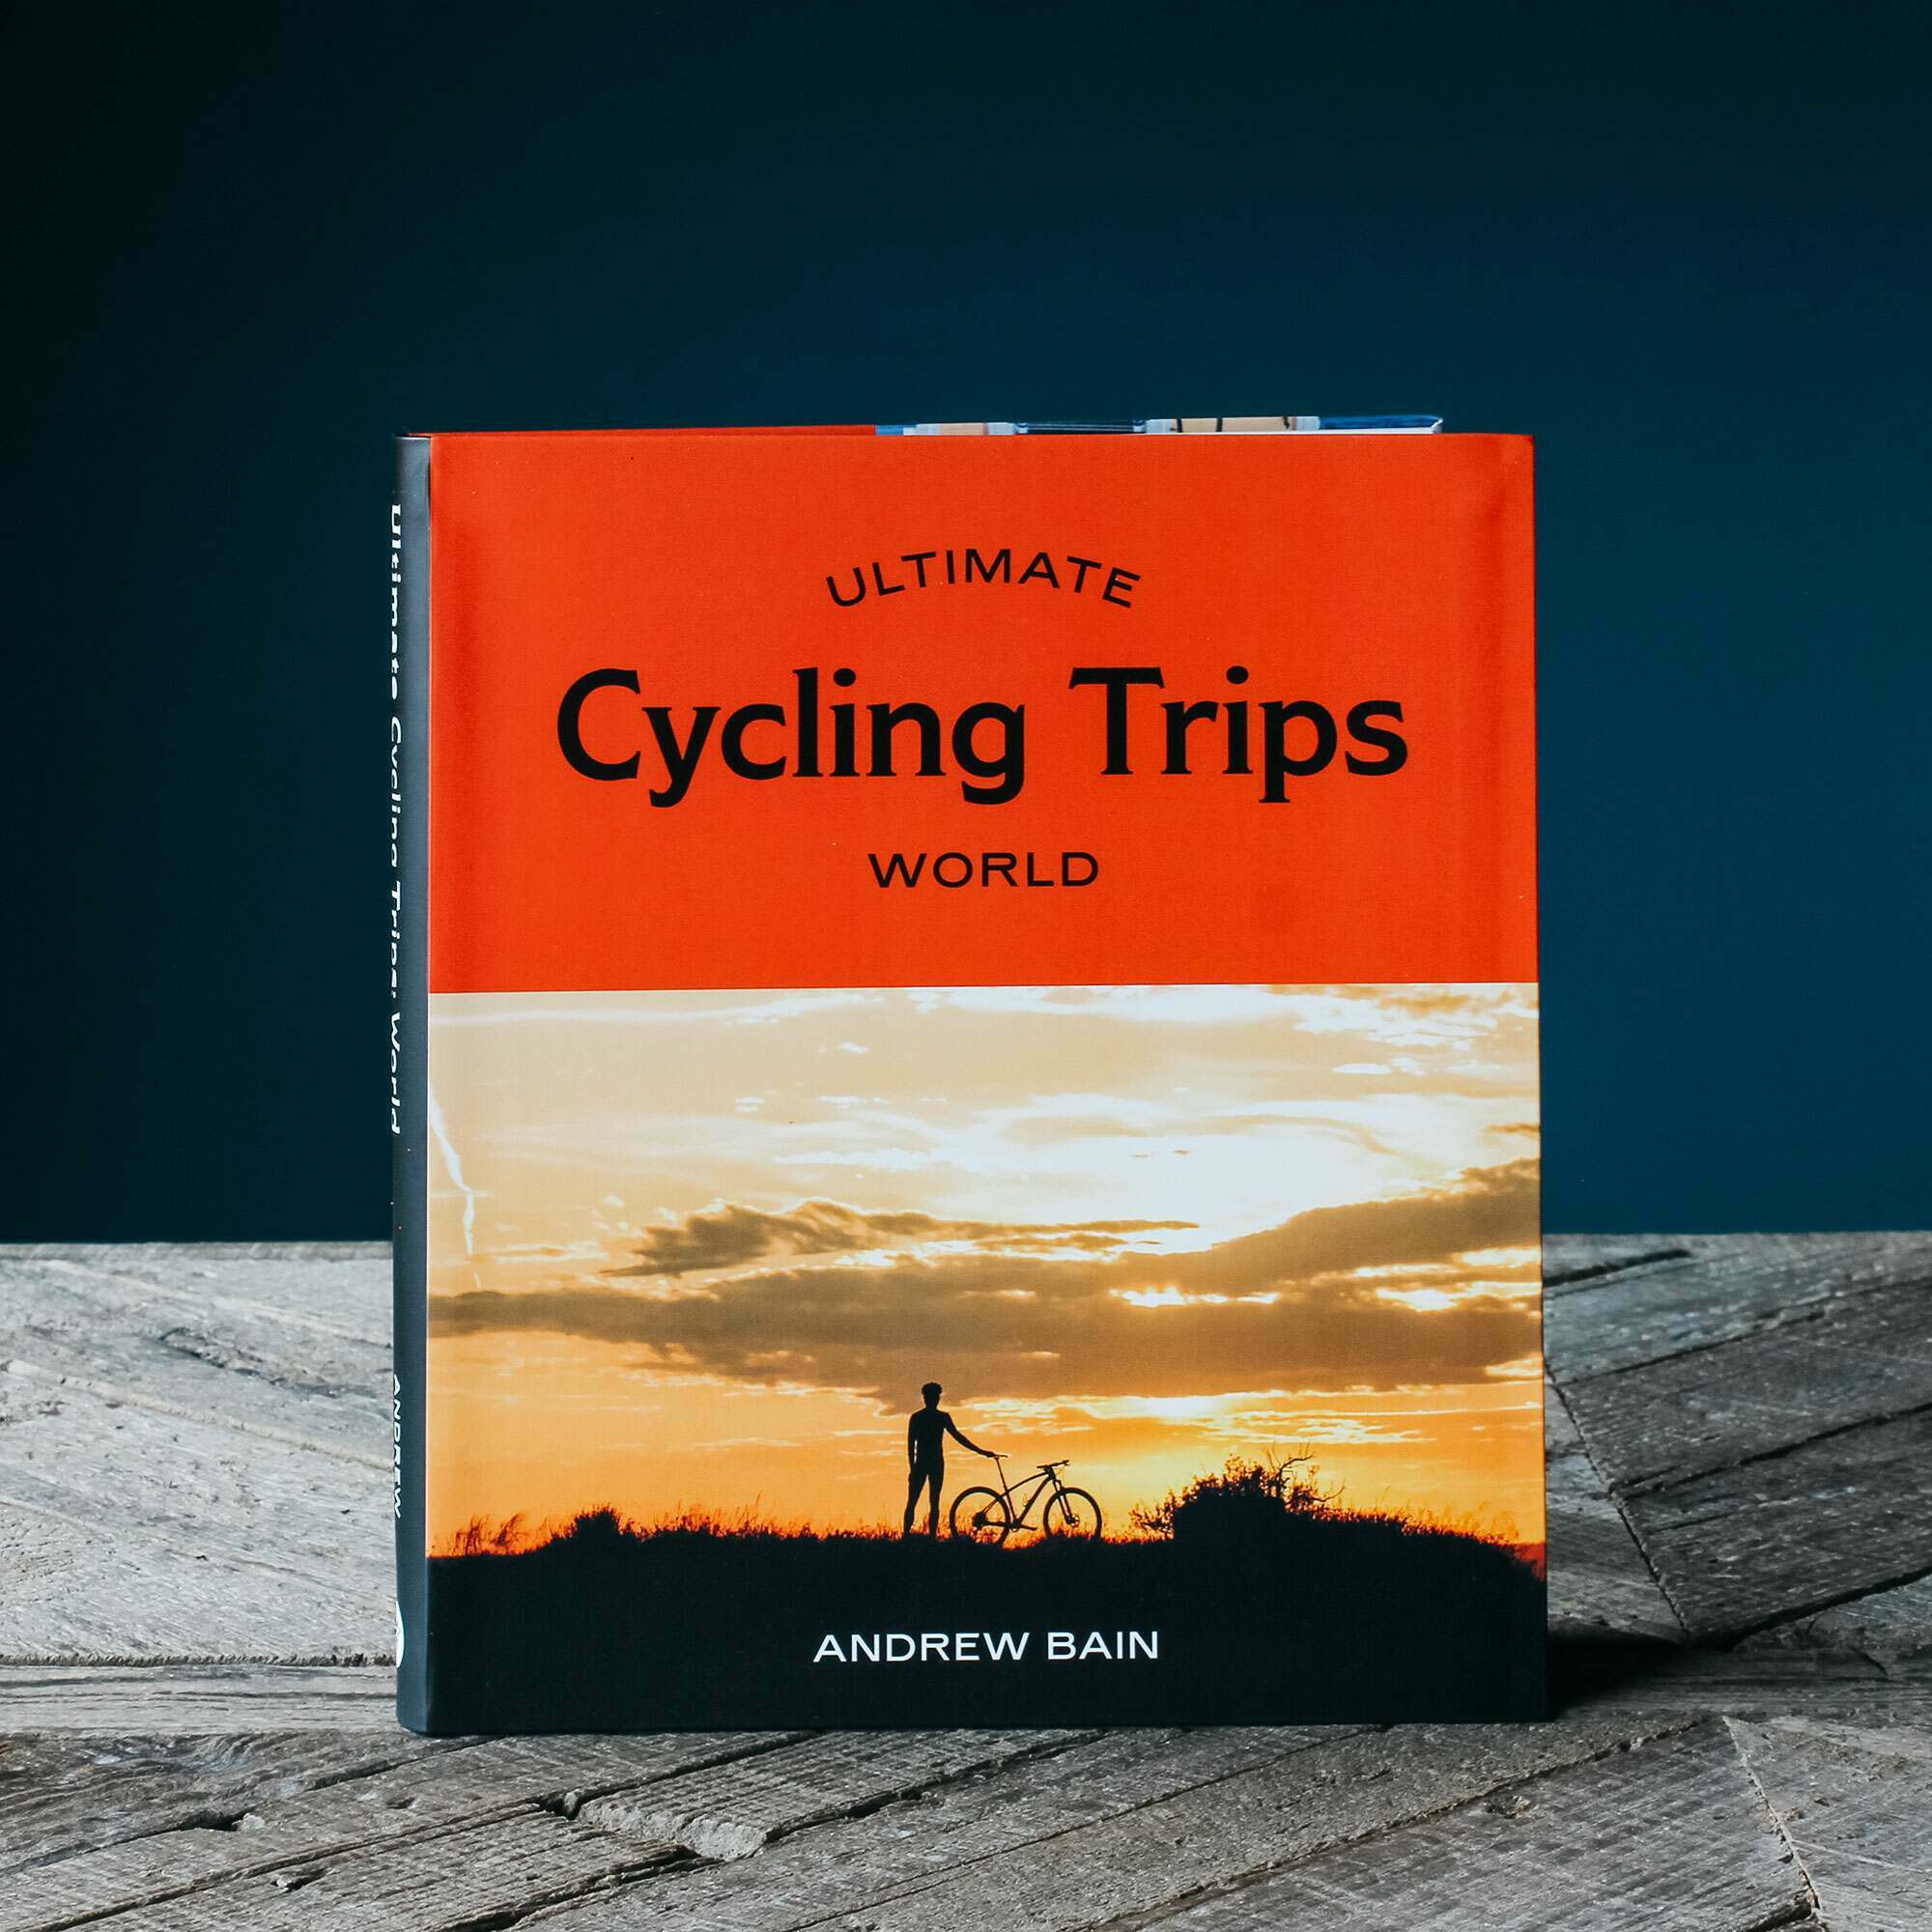 Photo of Graham and green ultimate cycling trips book